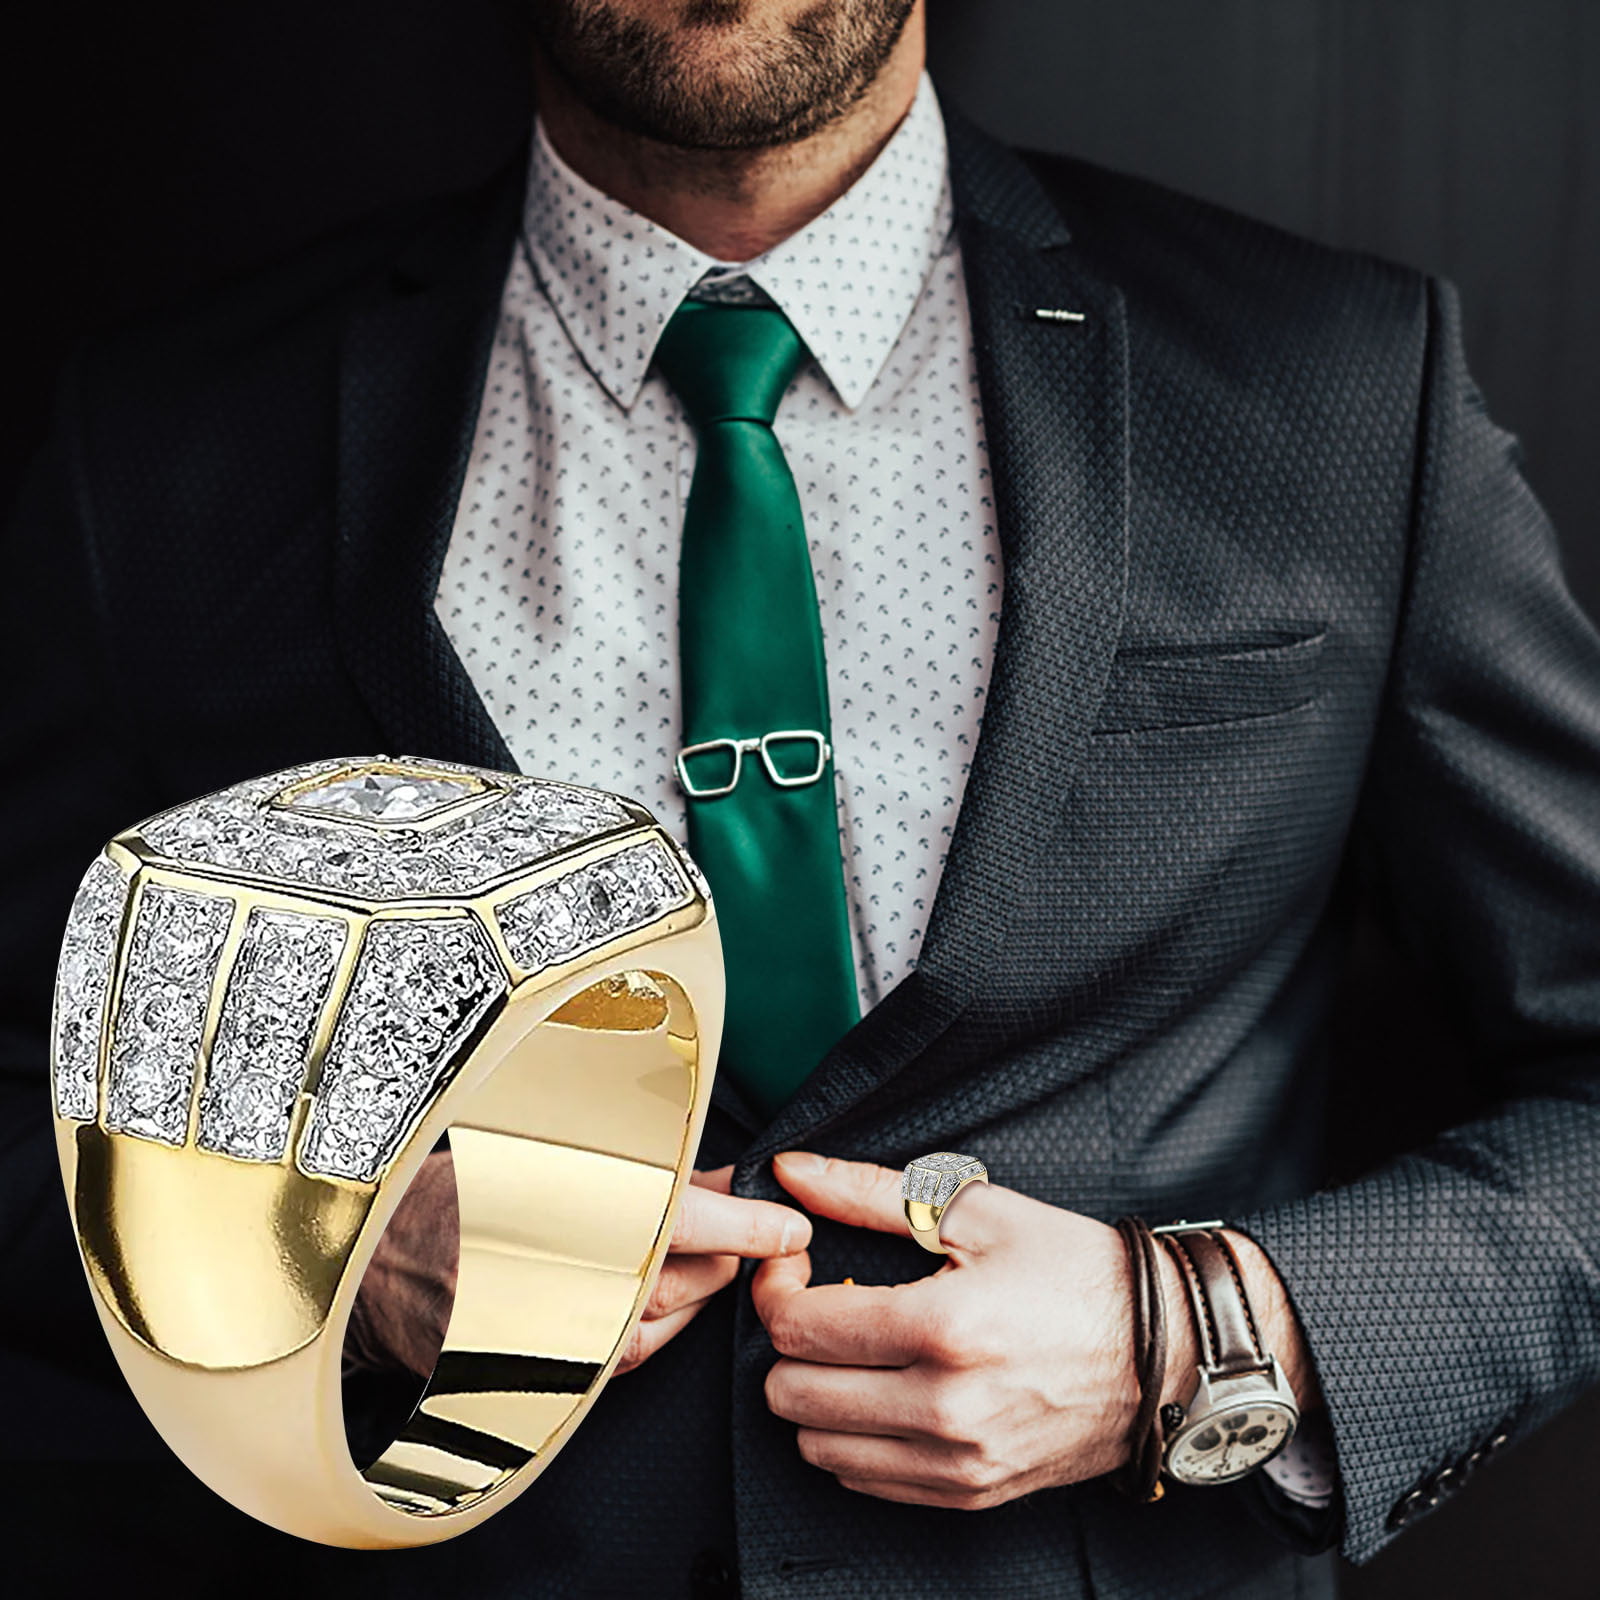 18K Gold Plated Mens Gold Cluster Ring With CZ Zircon, Vintage Rec Design,  And Diamond Accents Perfect Hip Hop Rapper Bling Gift For Boys From  Bdesybag, $24.05 | DHgate.Com